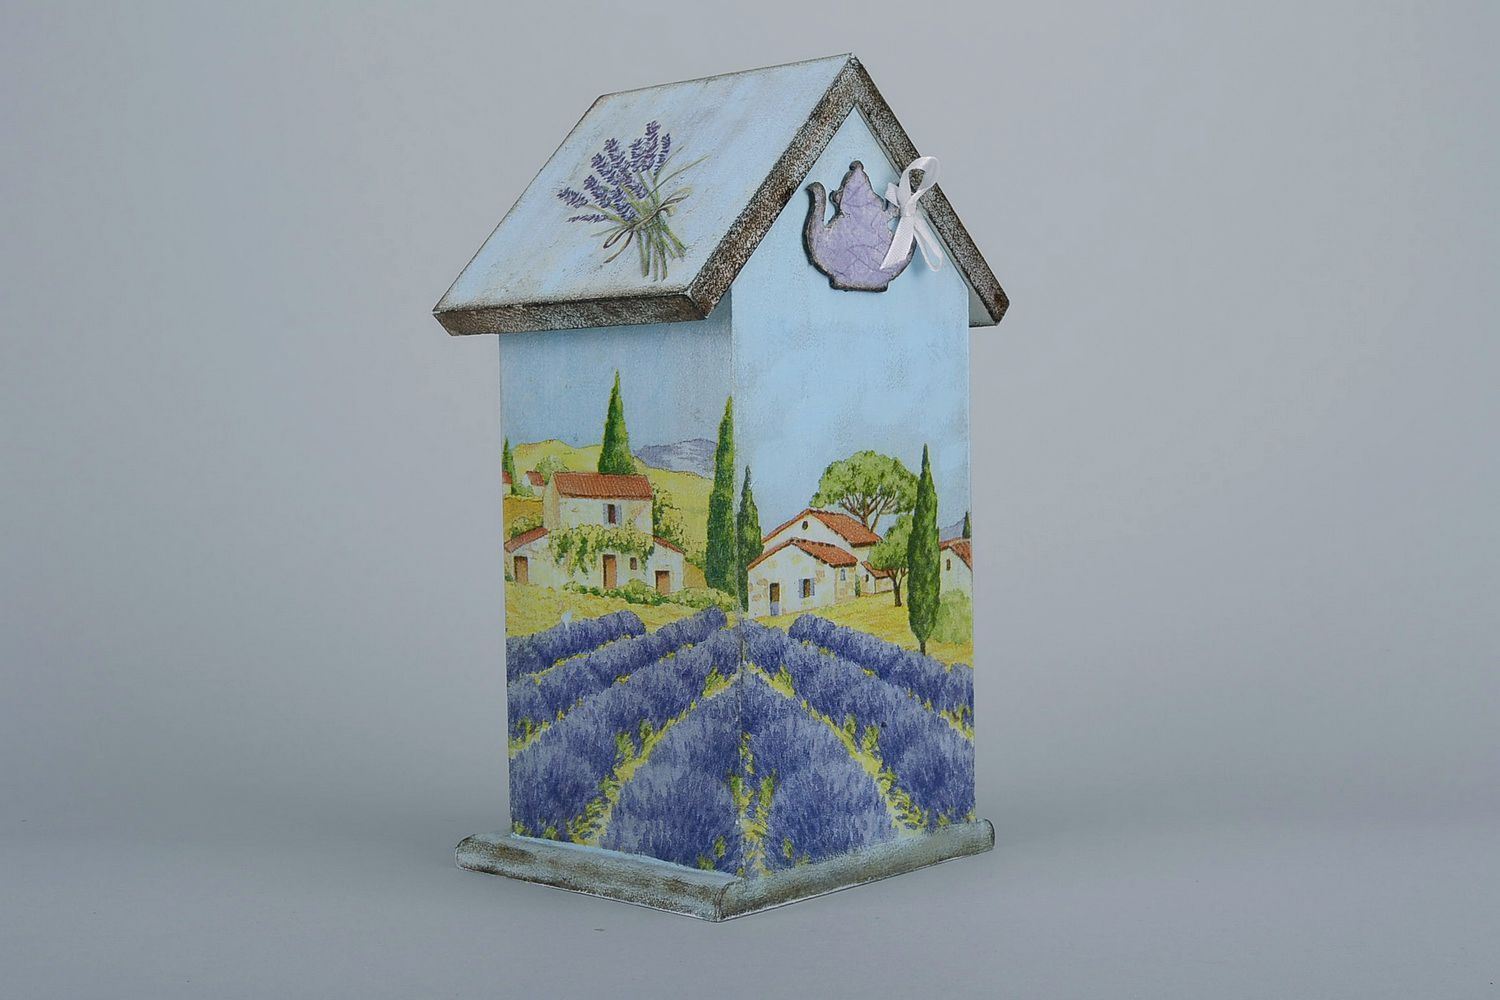 Tea-house made in the decoupage technique photo 2